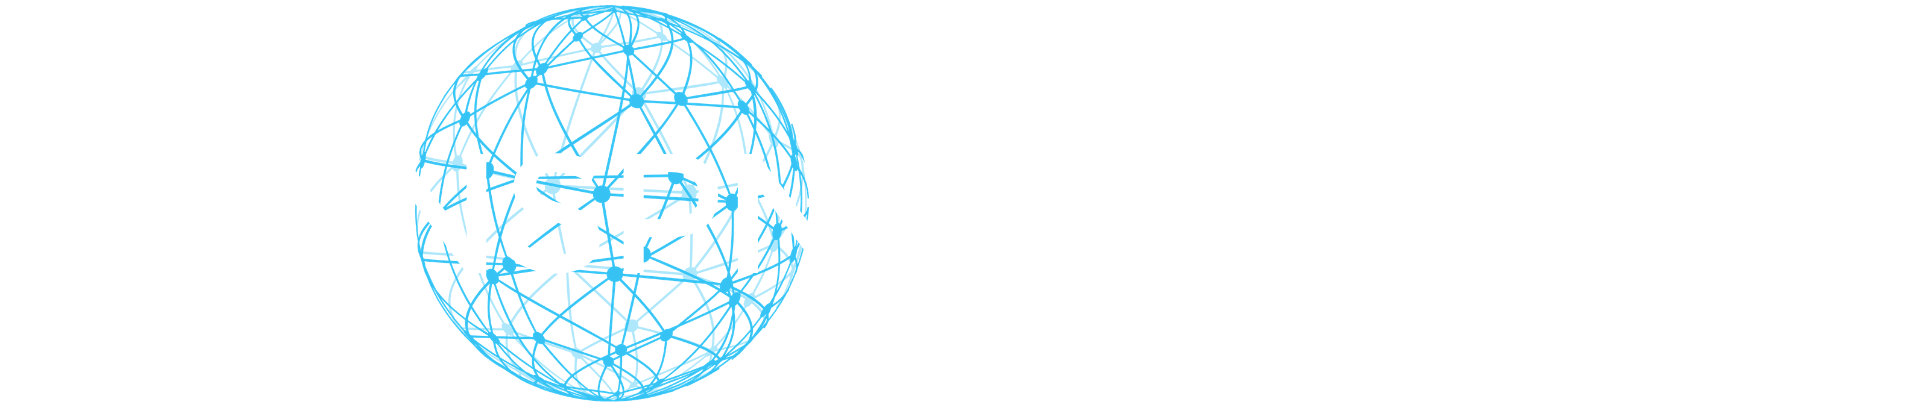 National Science Policy network logo